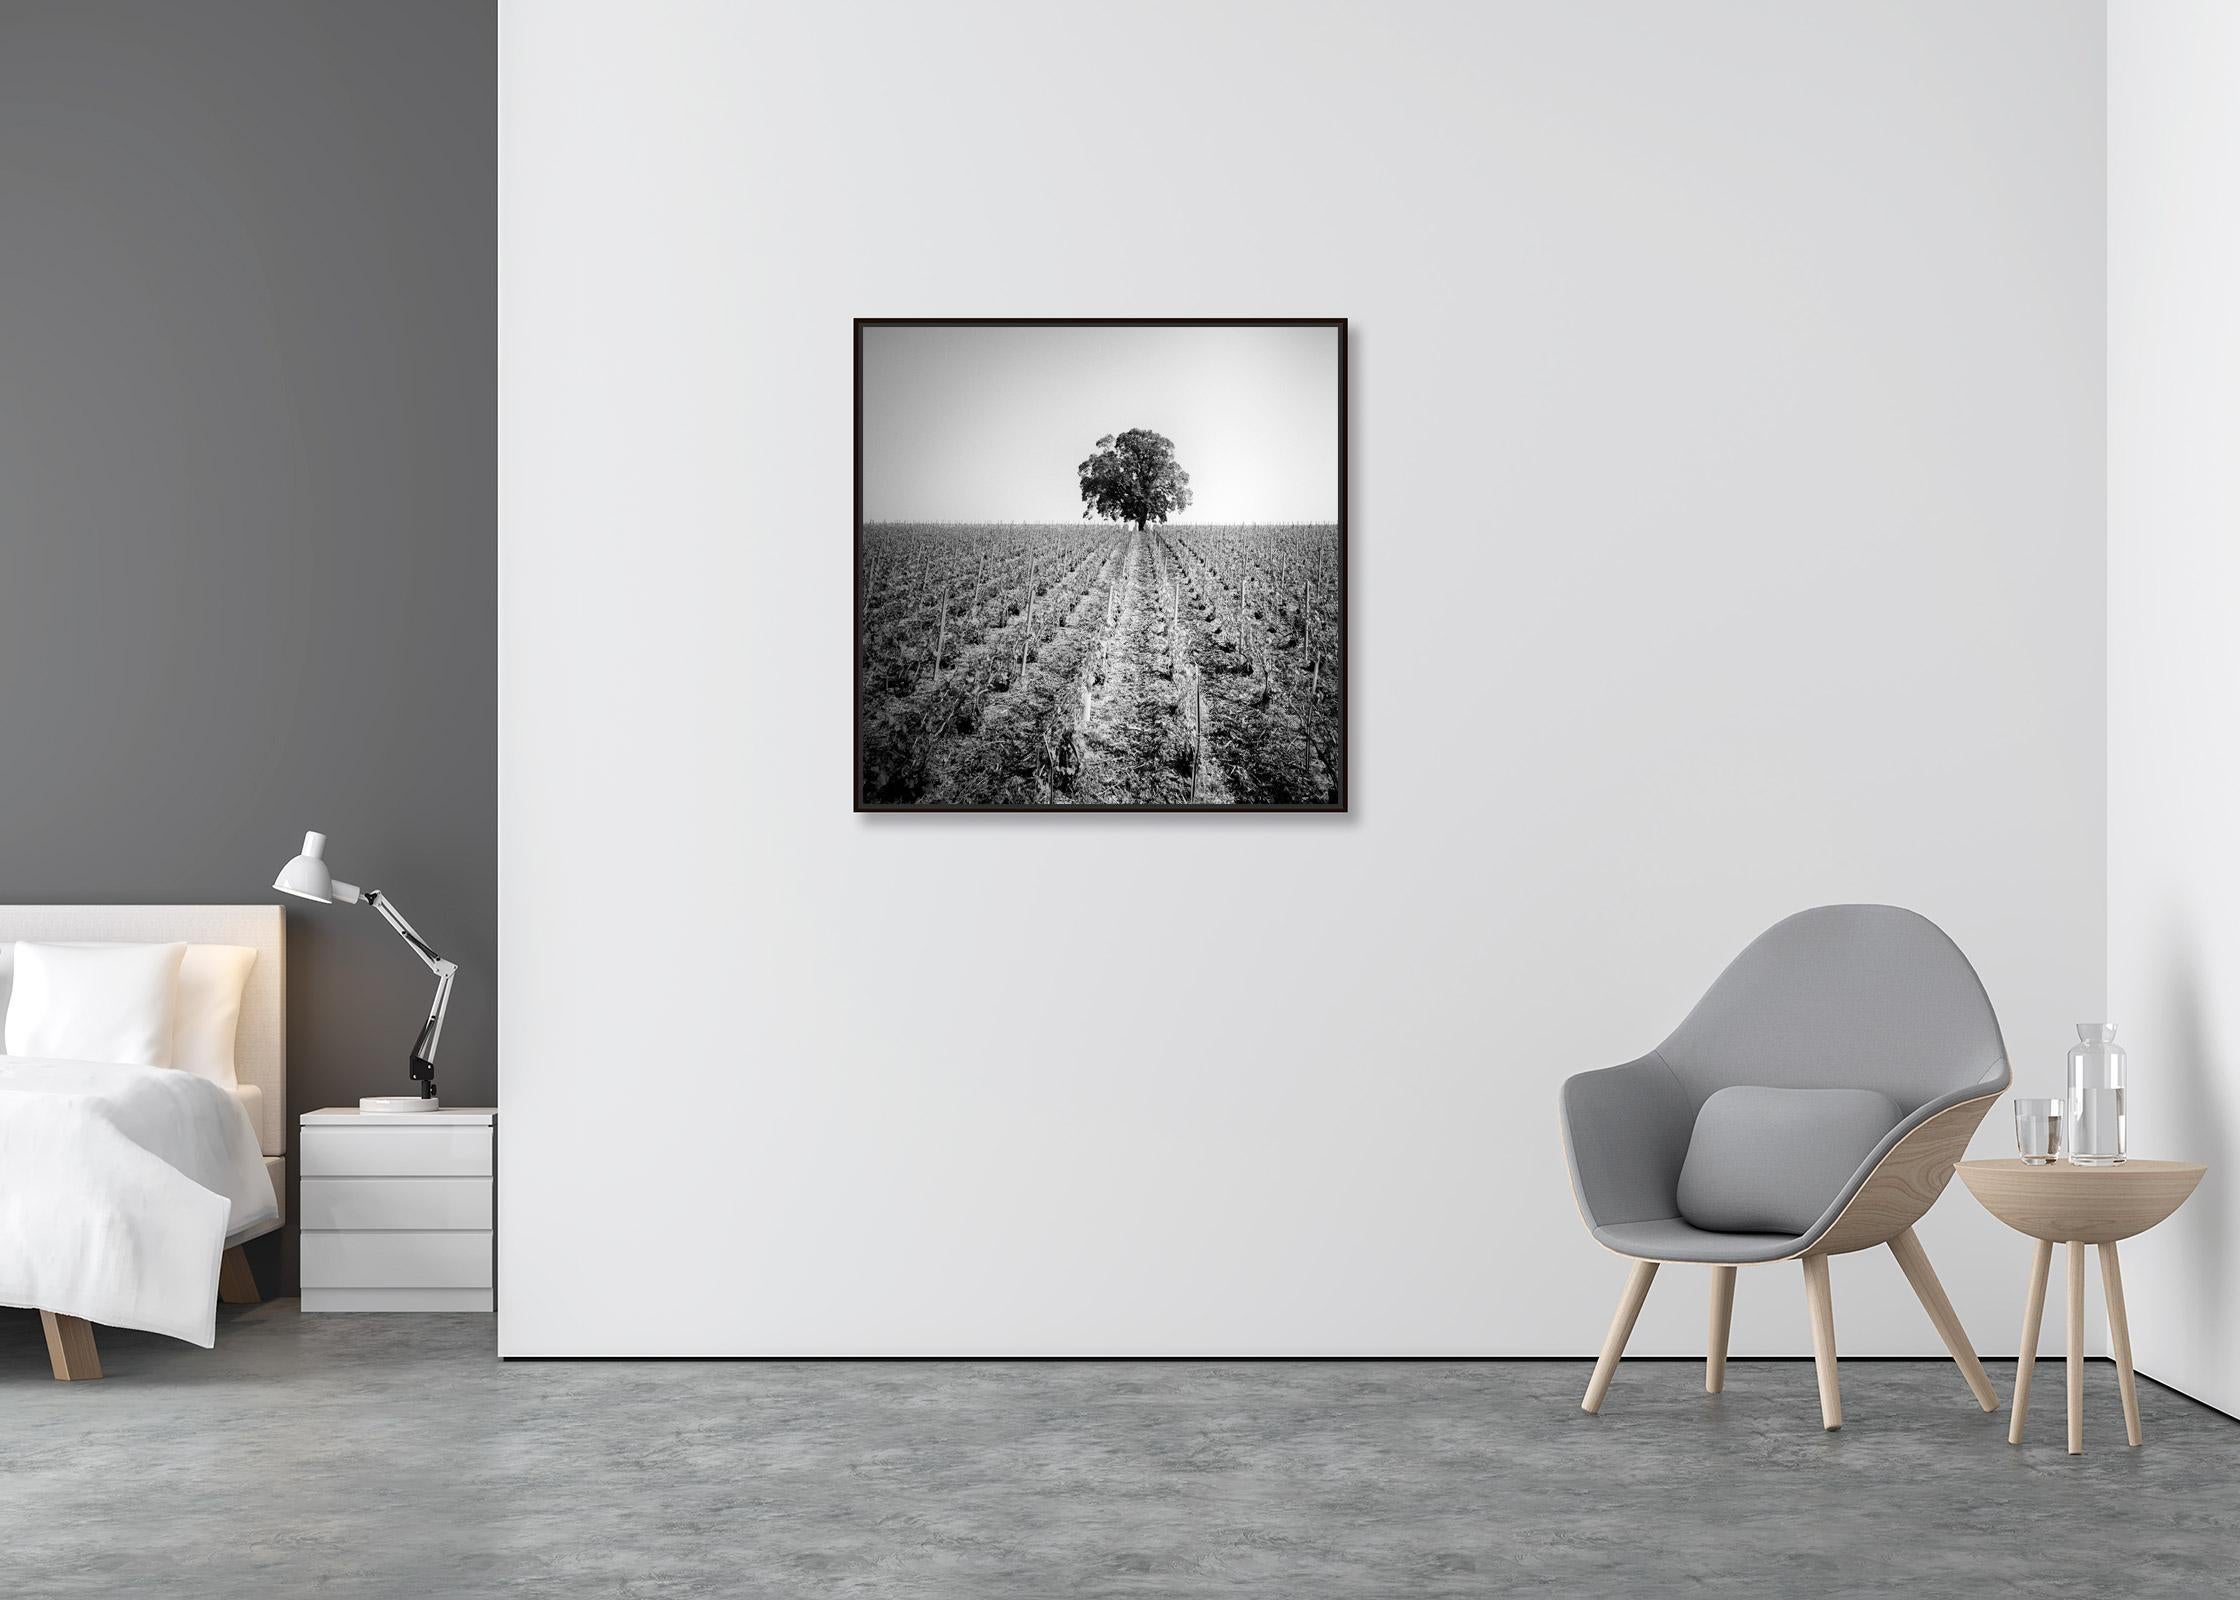 Vineyard Romance, single Tree, France, black and white photography, landscape - Contemporary Photograph by Gerald Berghammer